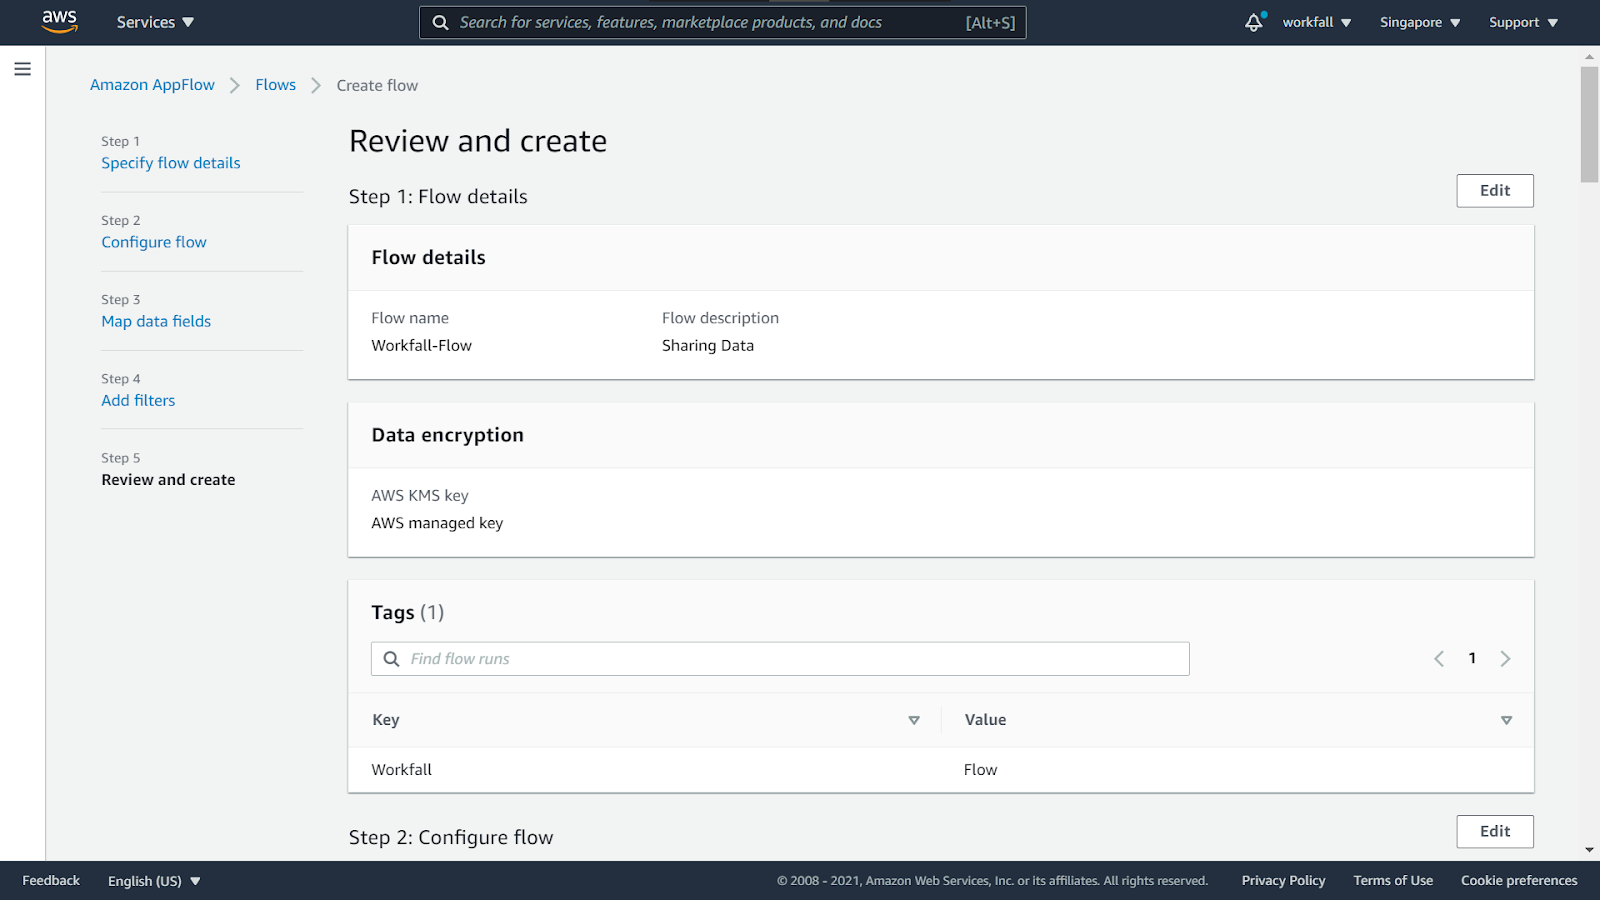 How to create a data flow to share data between AWS and Salesforce using Amazon AppFlow?